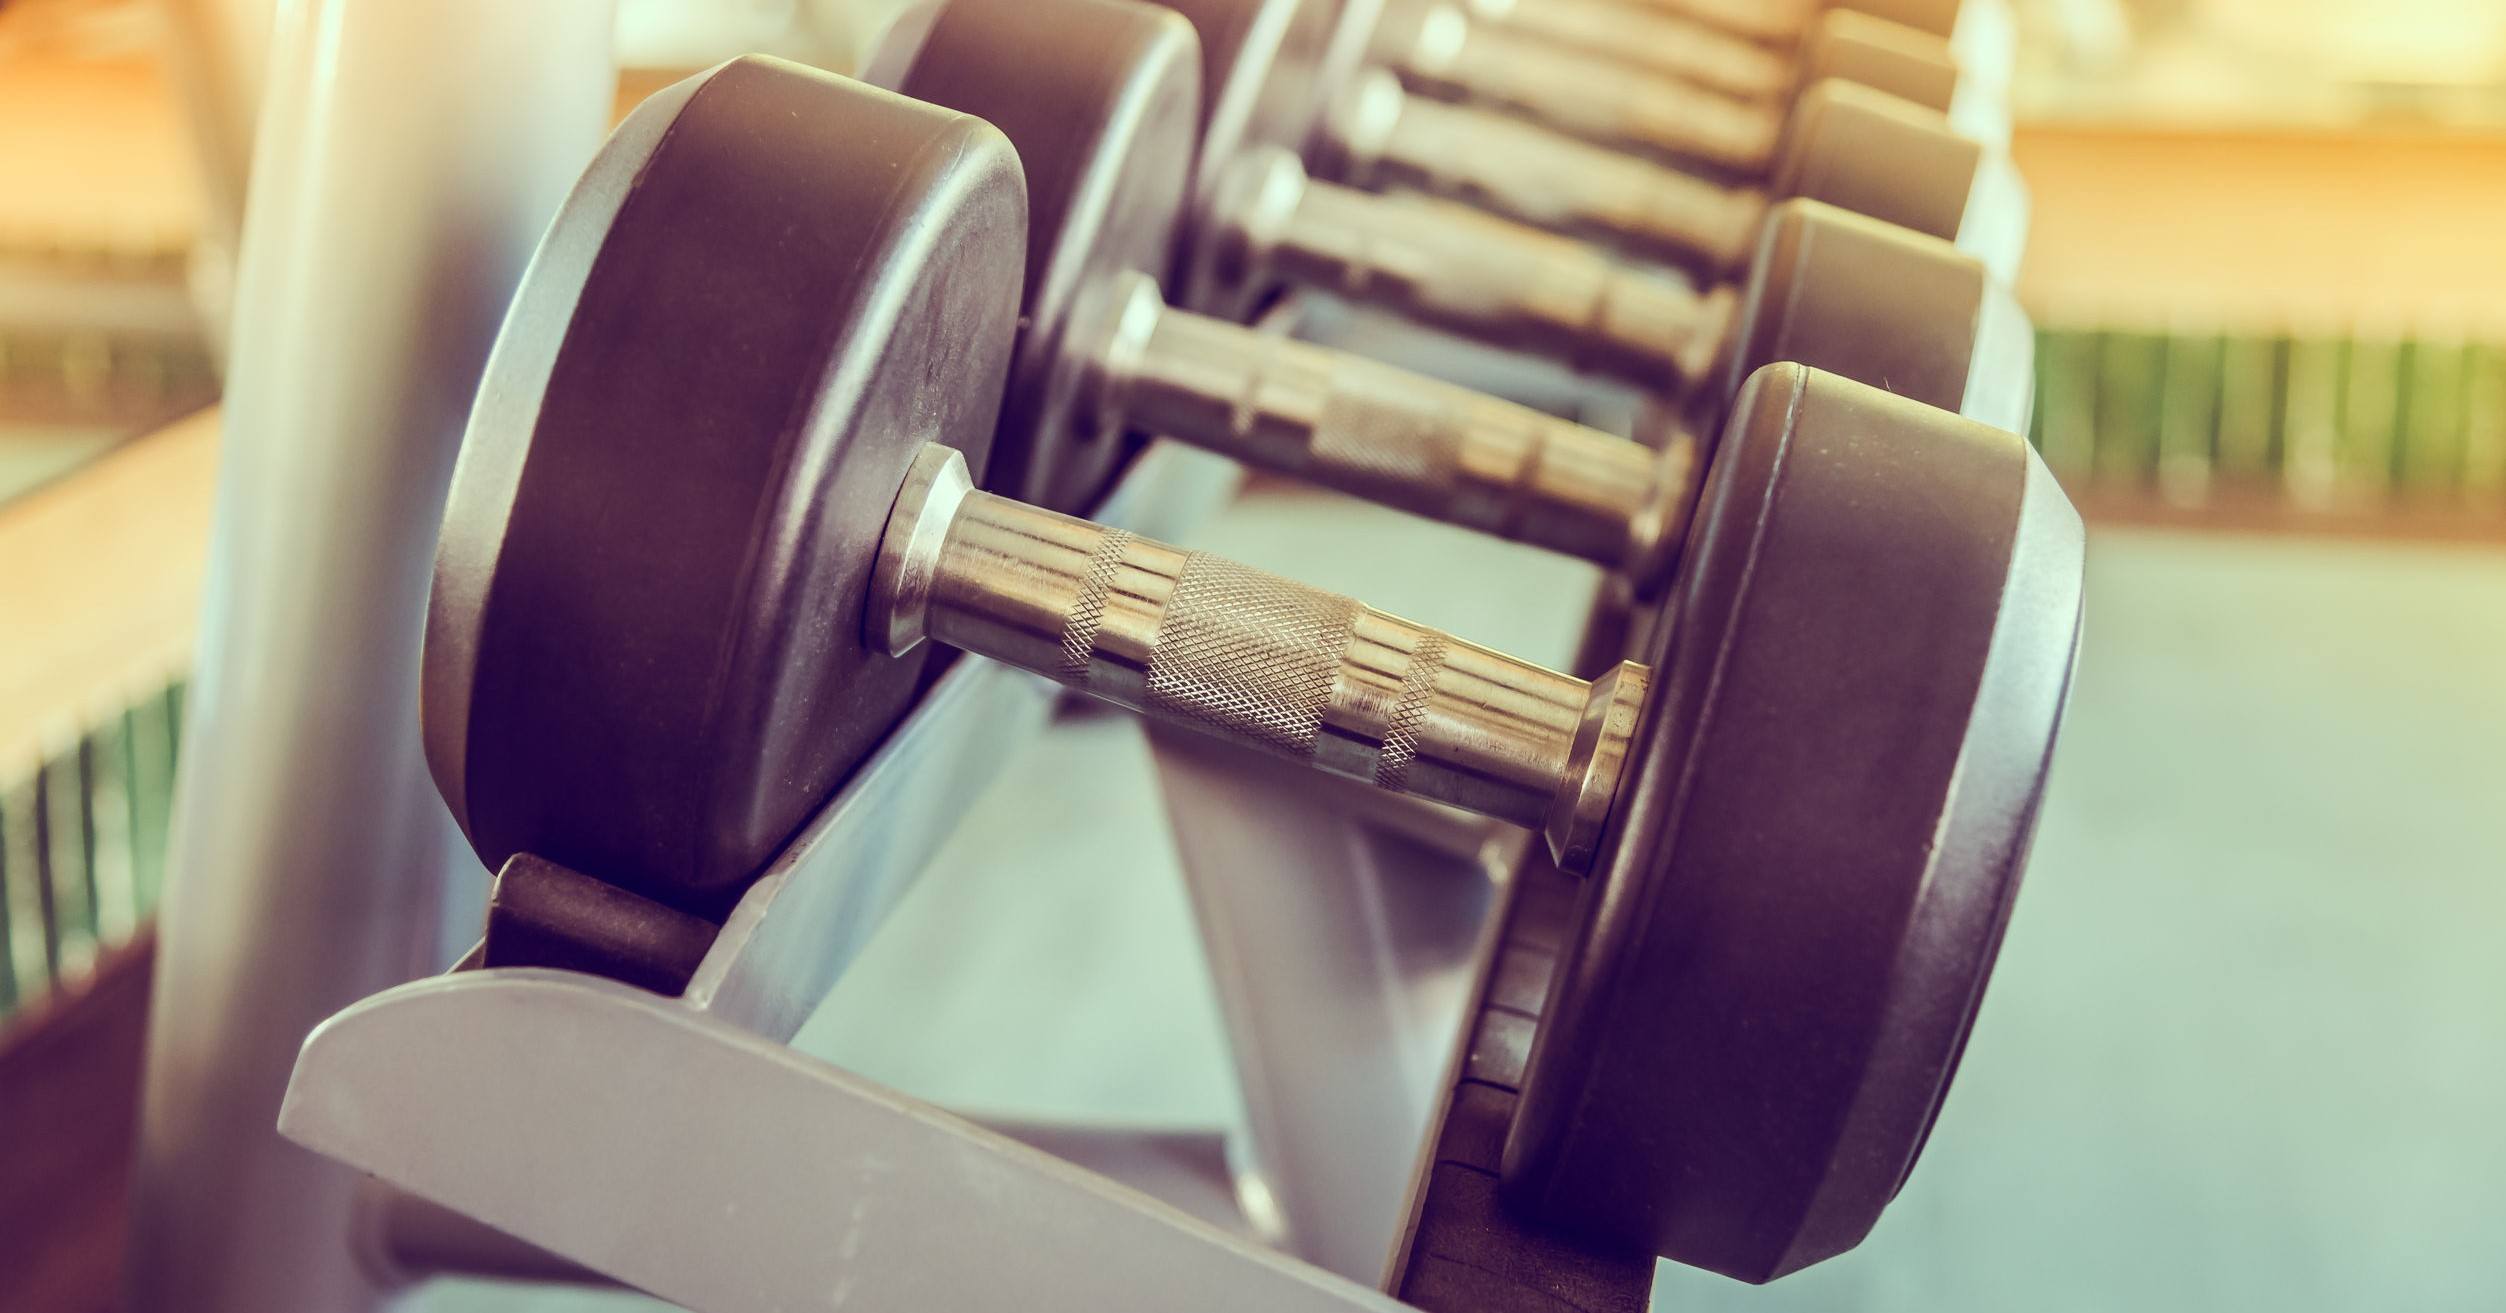 What to Do at the Gym If You're a Beginner